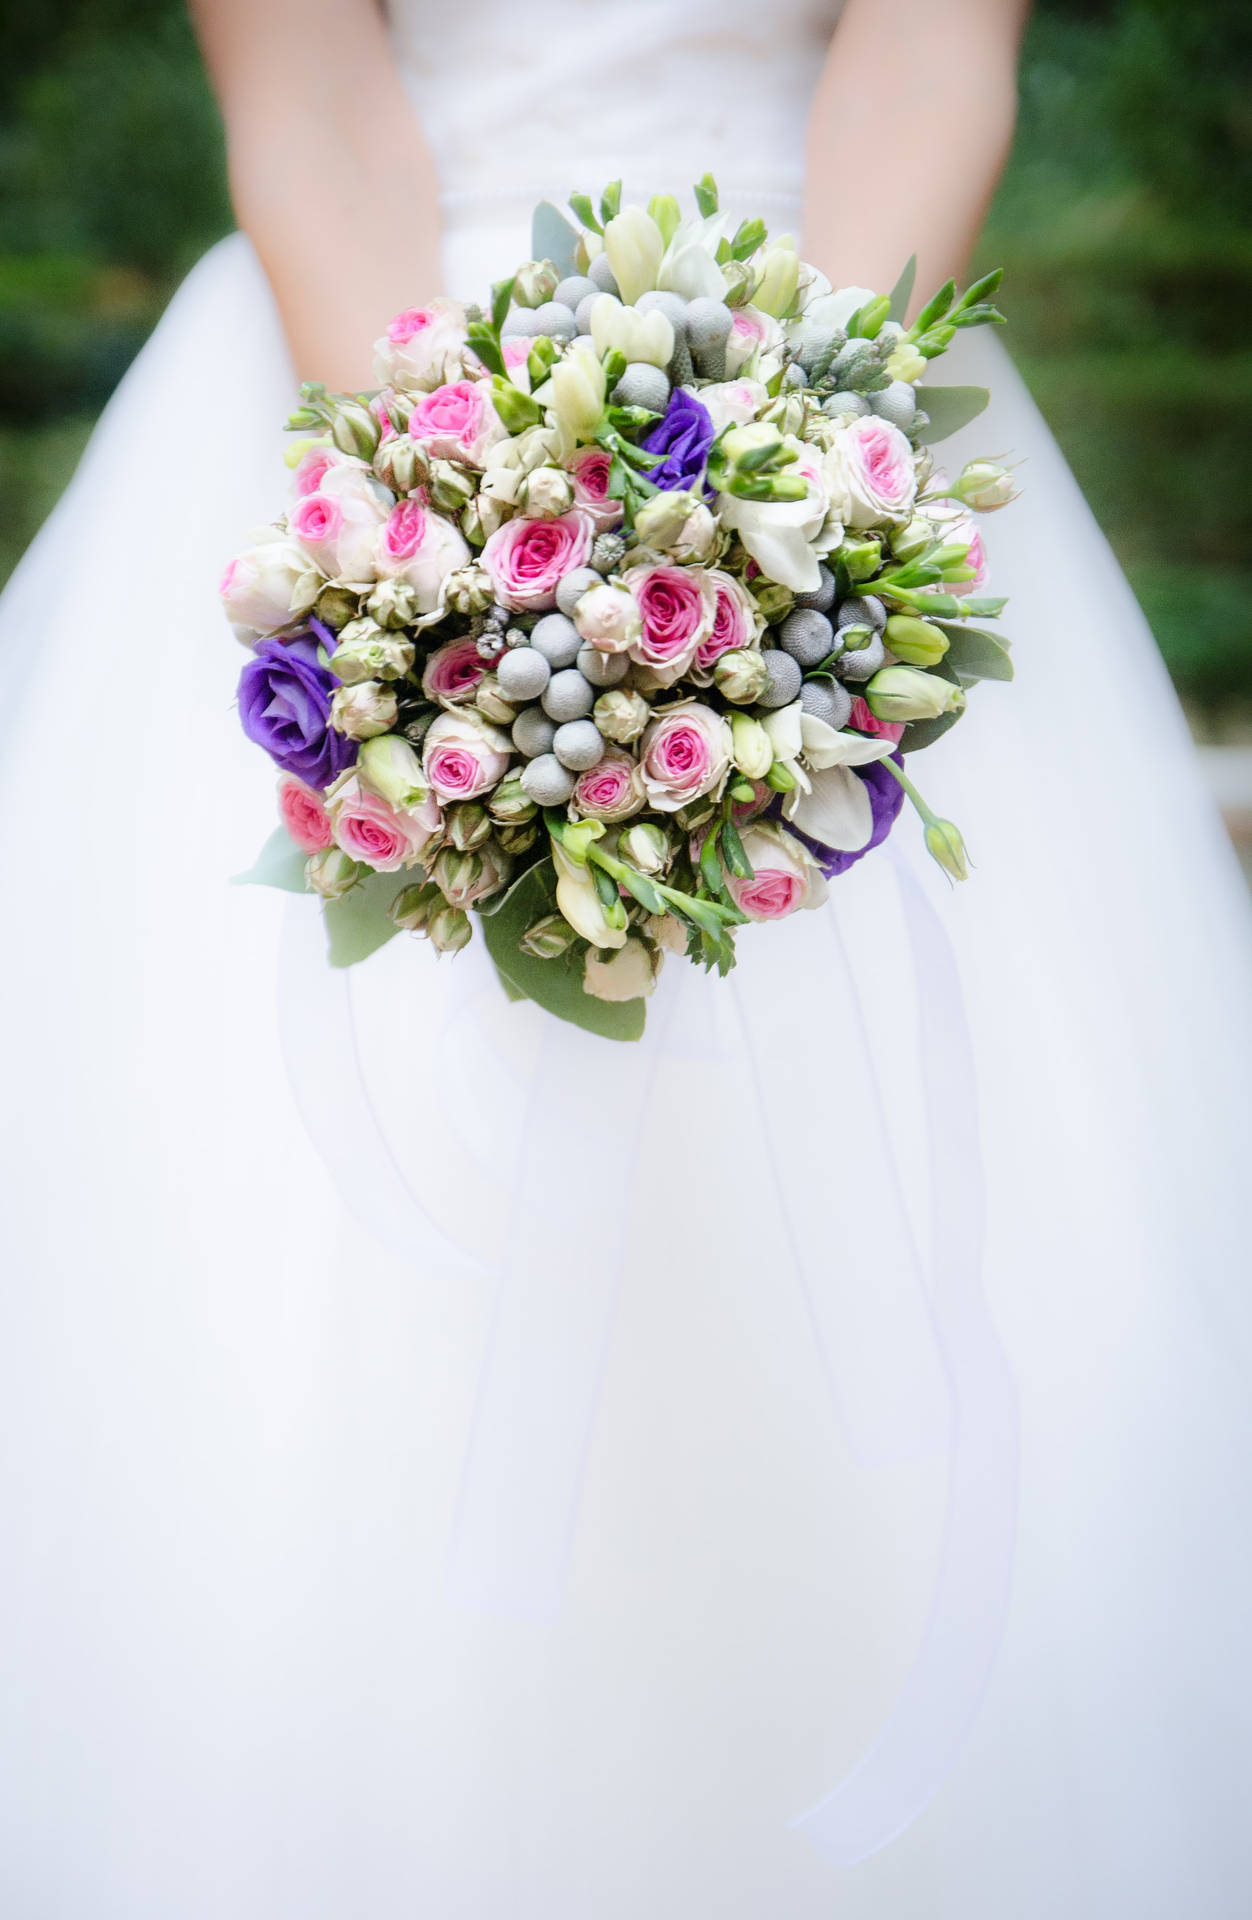 Caption: Serene Beauty of White Tulips and Blush&Blue Roses Bouquet Wallpaper